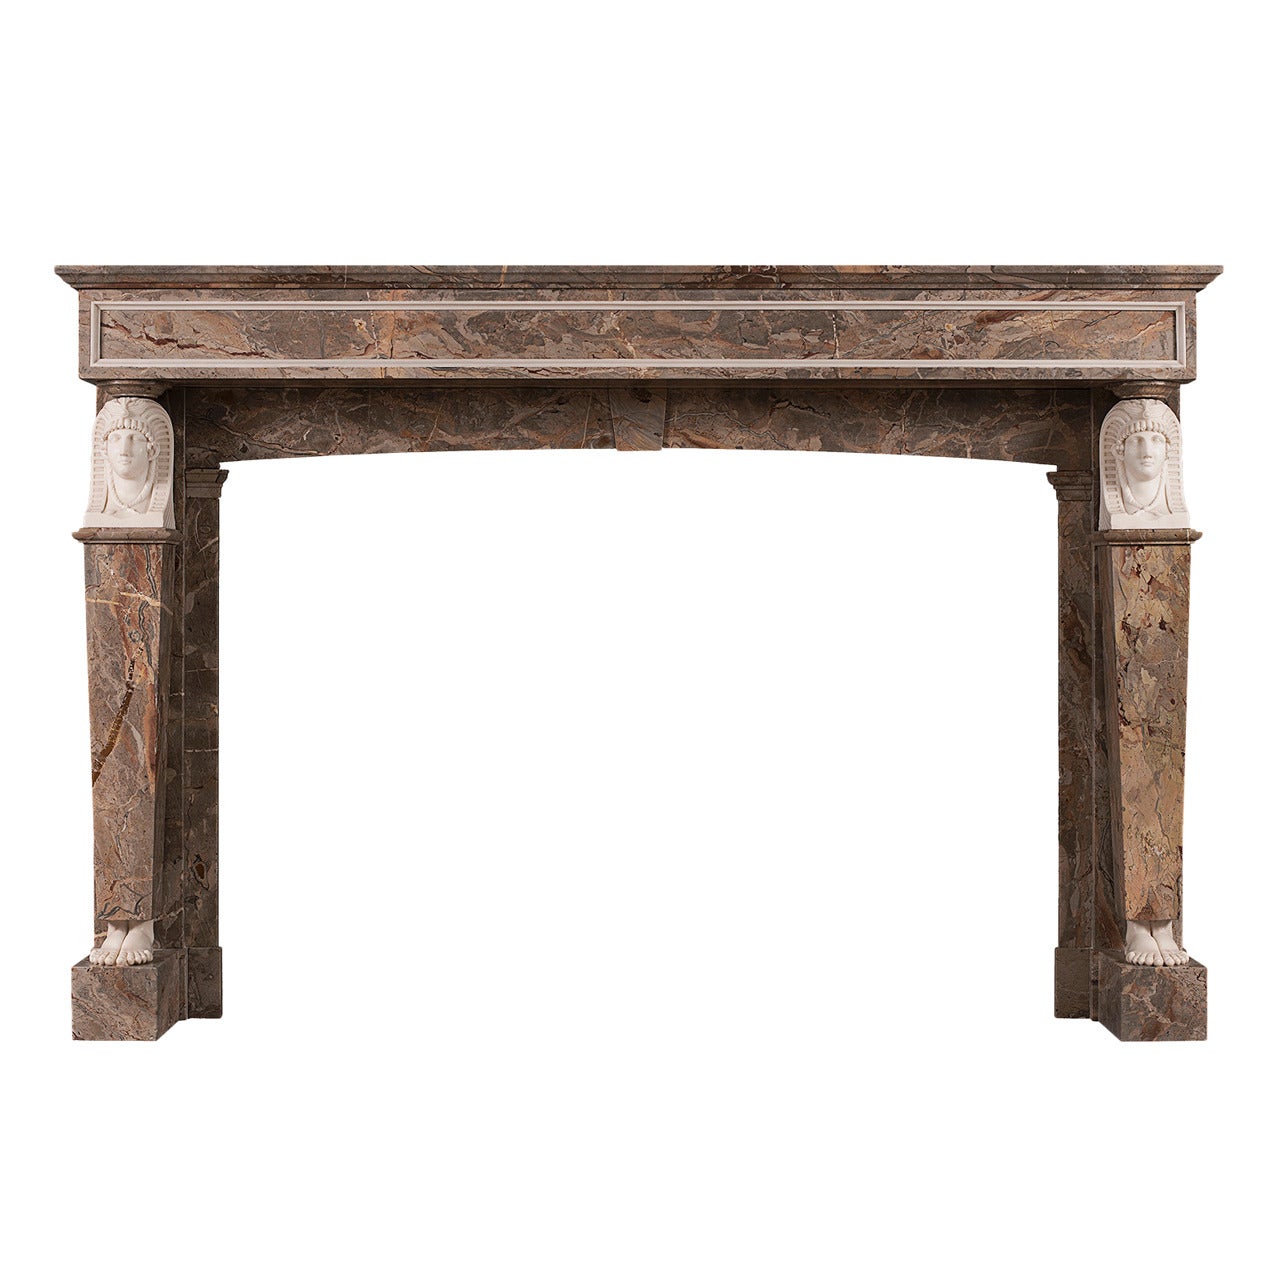 French Empire Sarancolin and Statuary Marble Fireplace Mantel For Sale